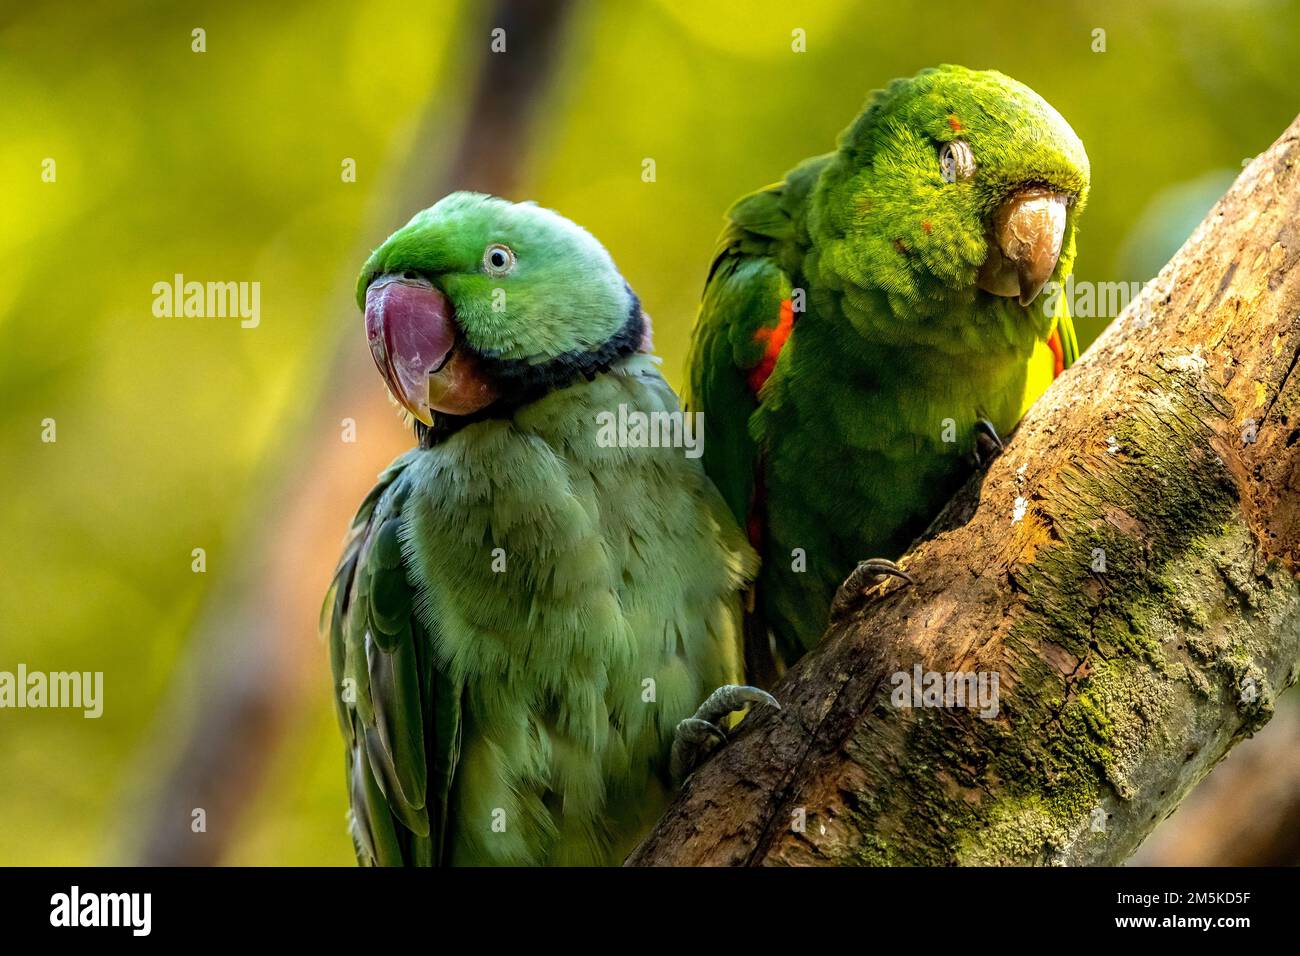 A closeup of an Echo parakeets, Psittacula eques green parrots against a blurred background Stock Photo